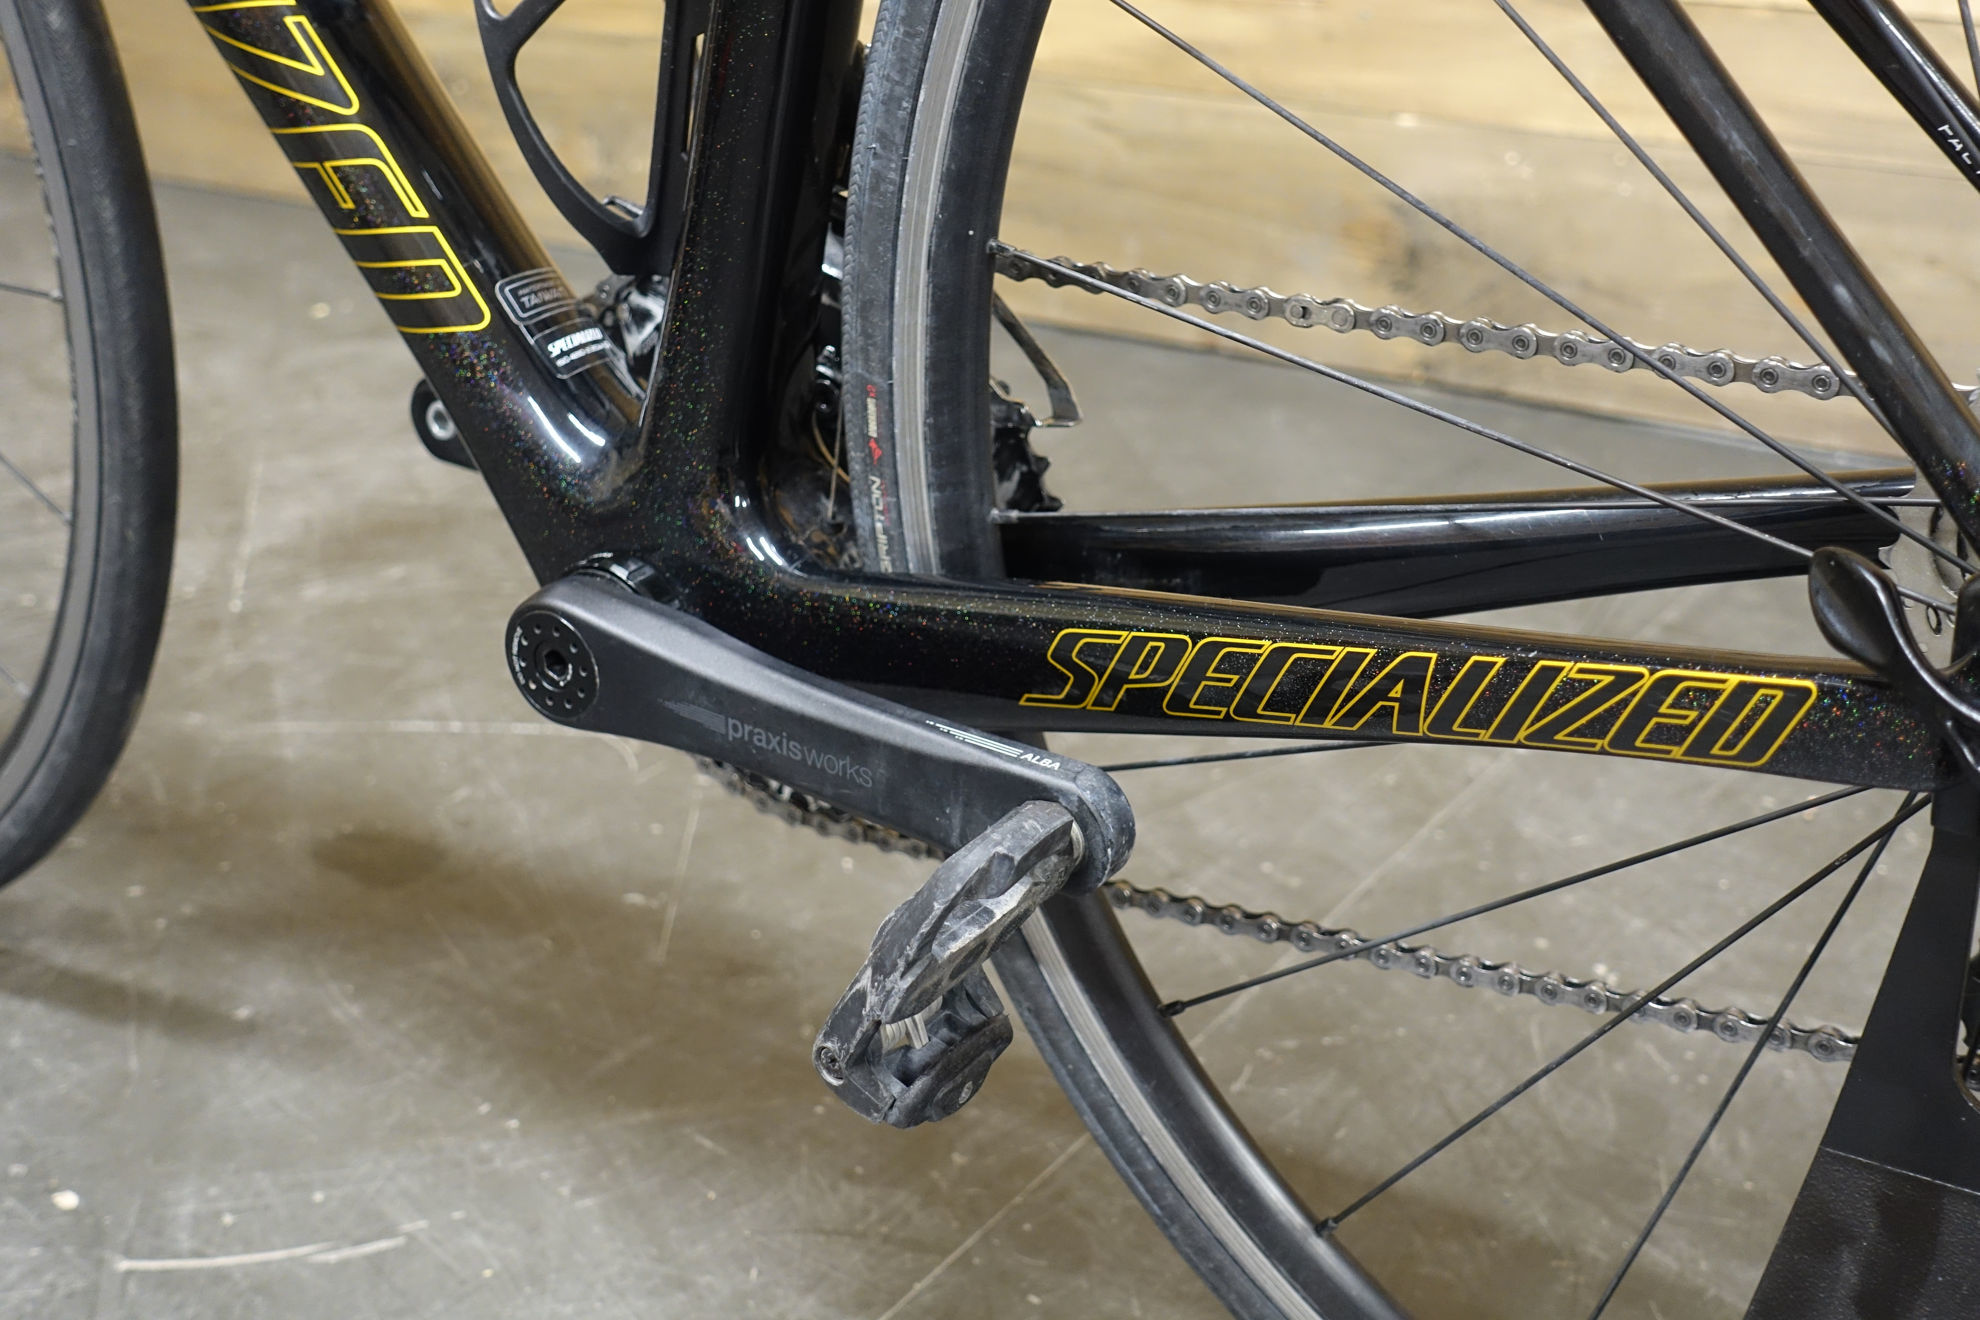 Picture of Specialized Tarmac Comp Tg.49 - USATA